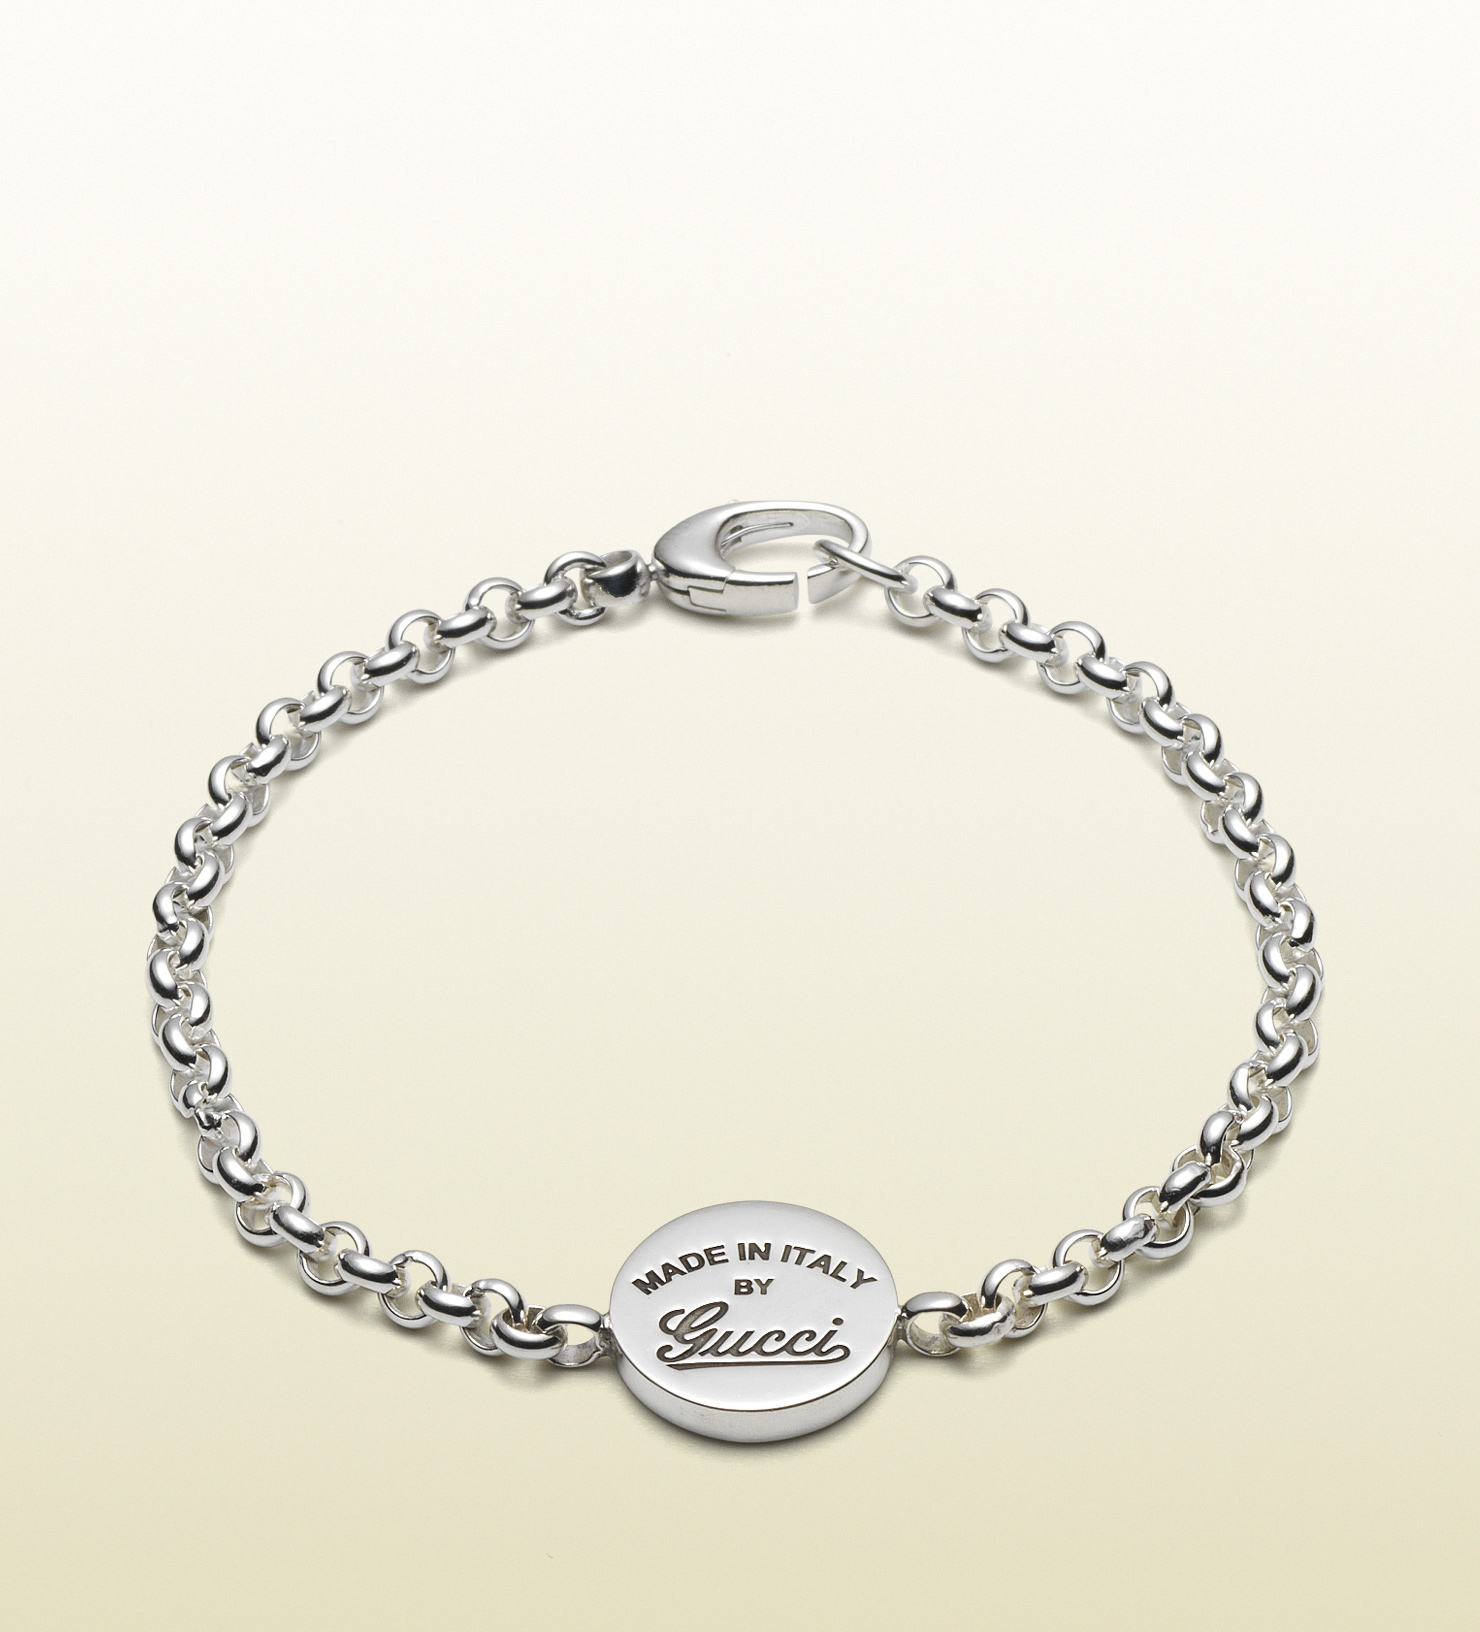 Lyst - Gucci Bracelet With Vintage Trademark Engraving in Metallic for Men